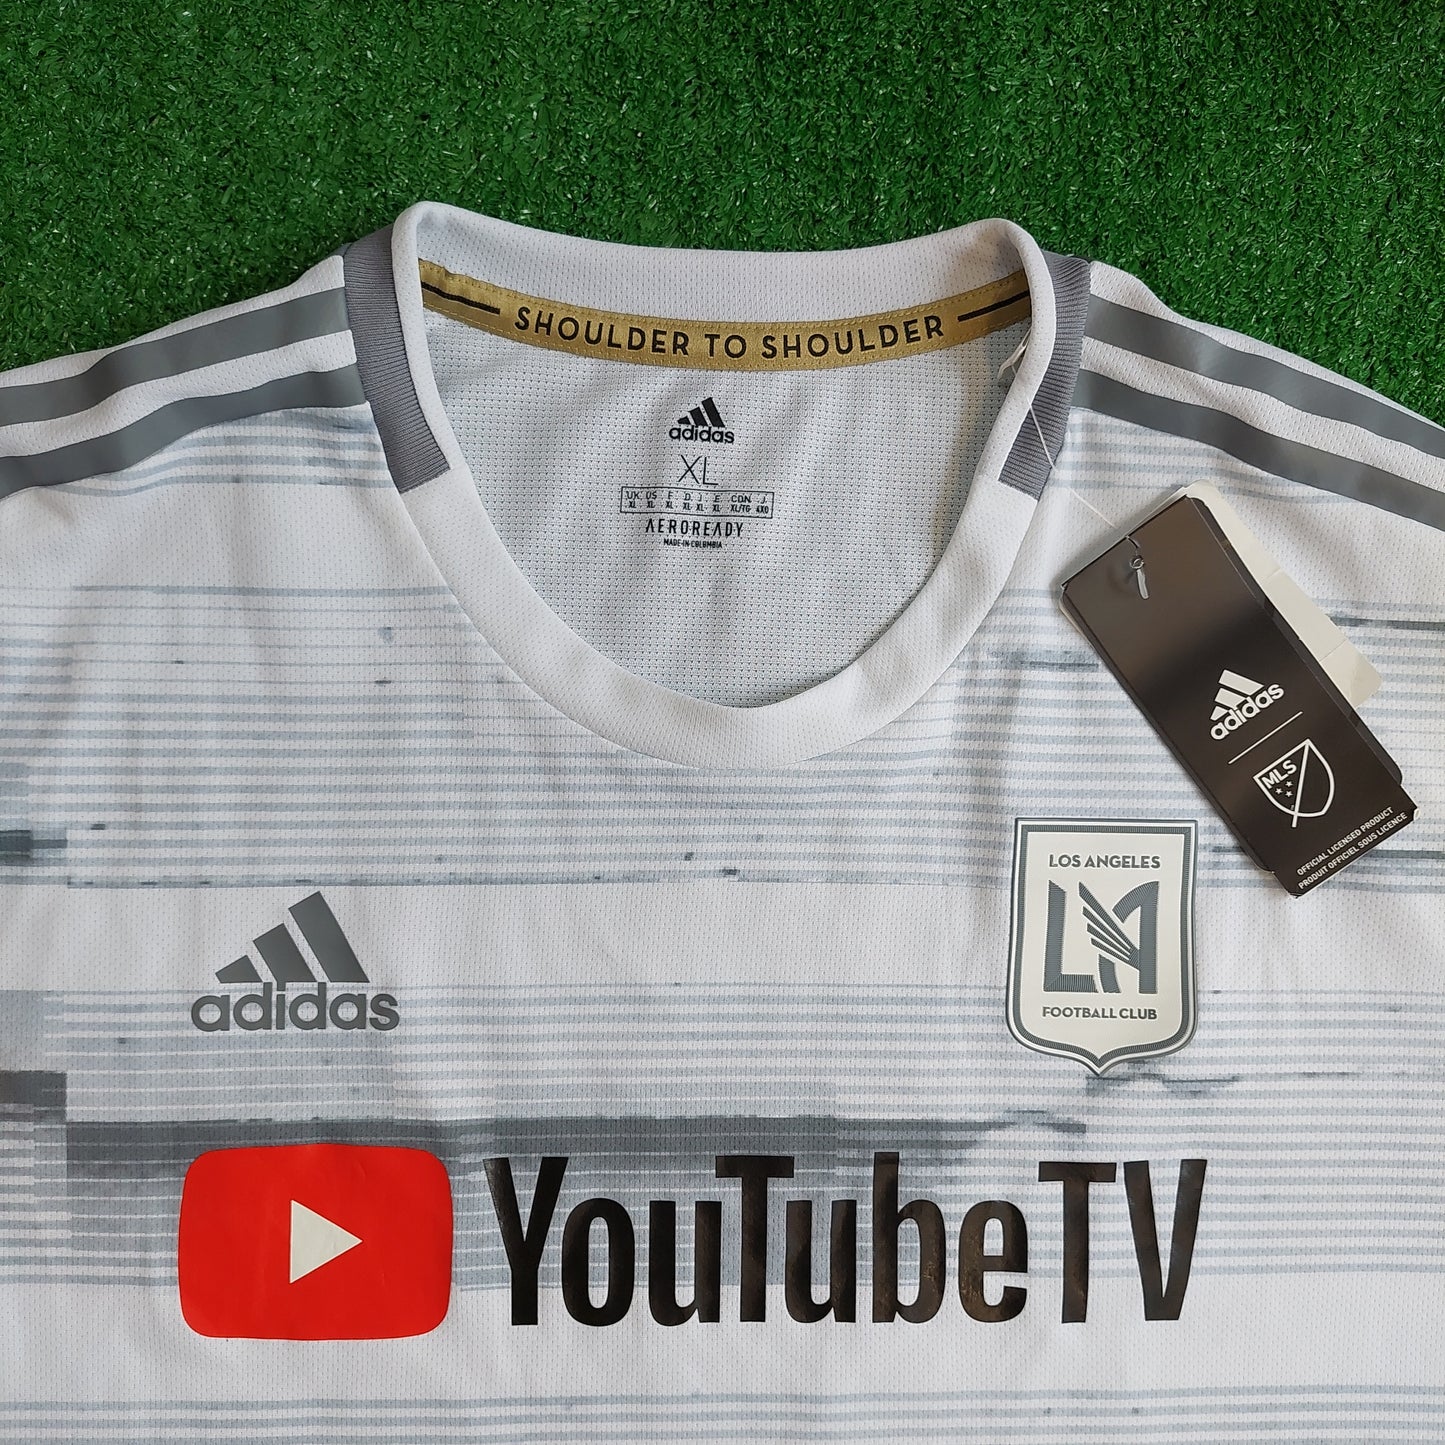 Los Angeles FC 2019 *Authentic* Away Shirt (BNWT) - Size XL